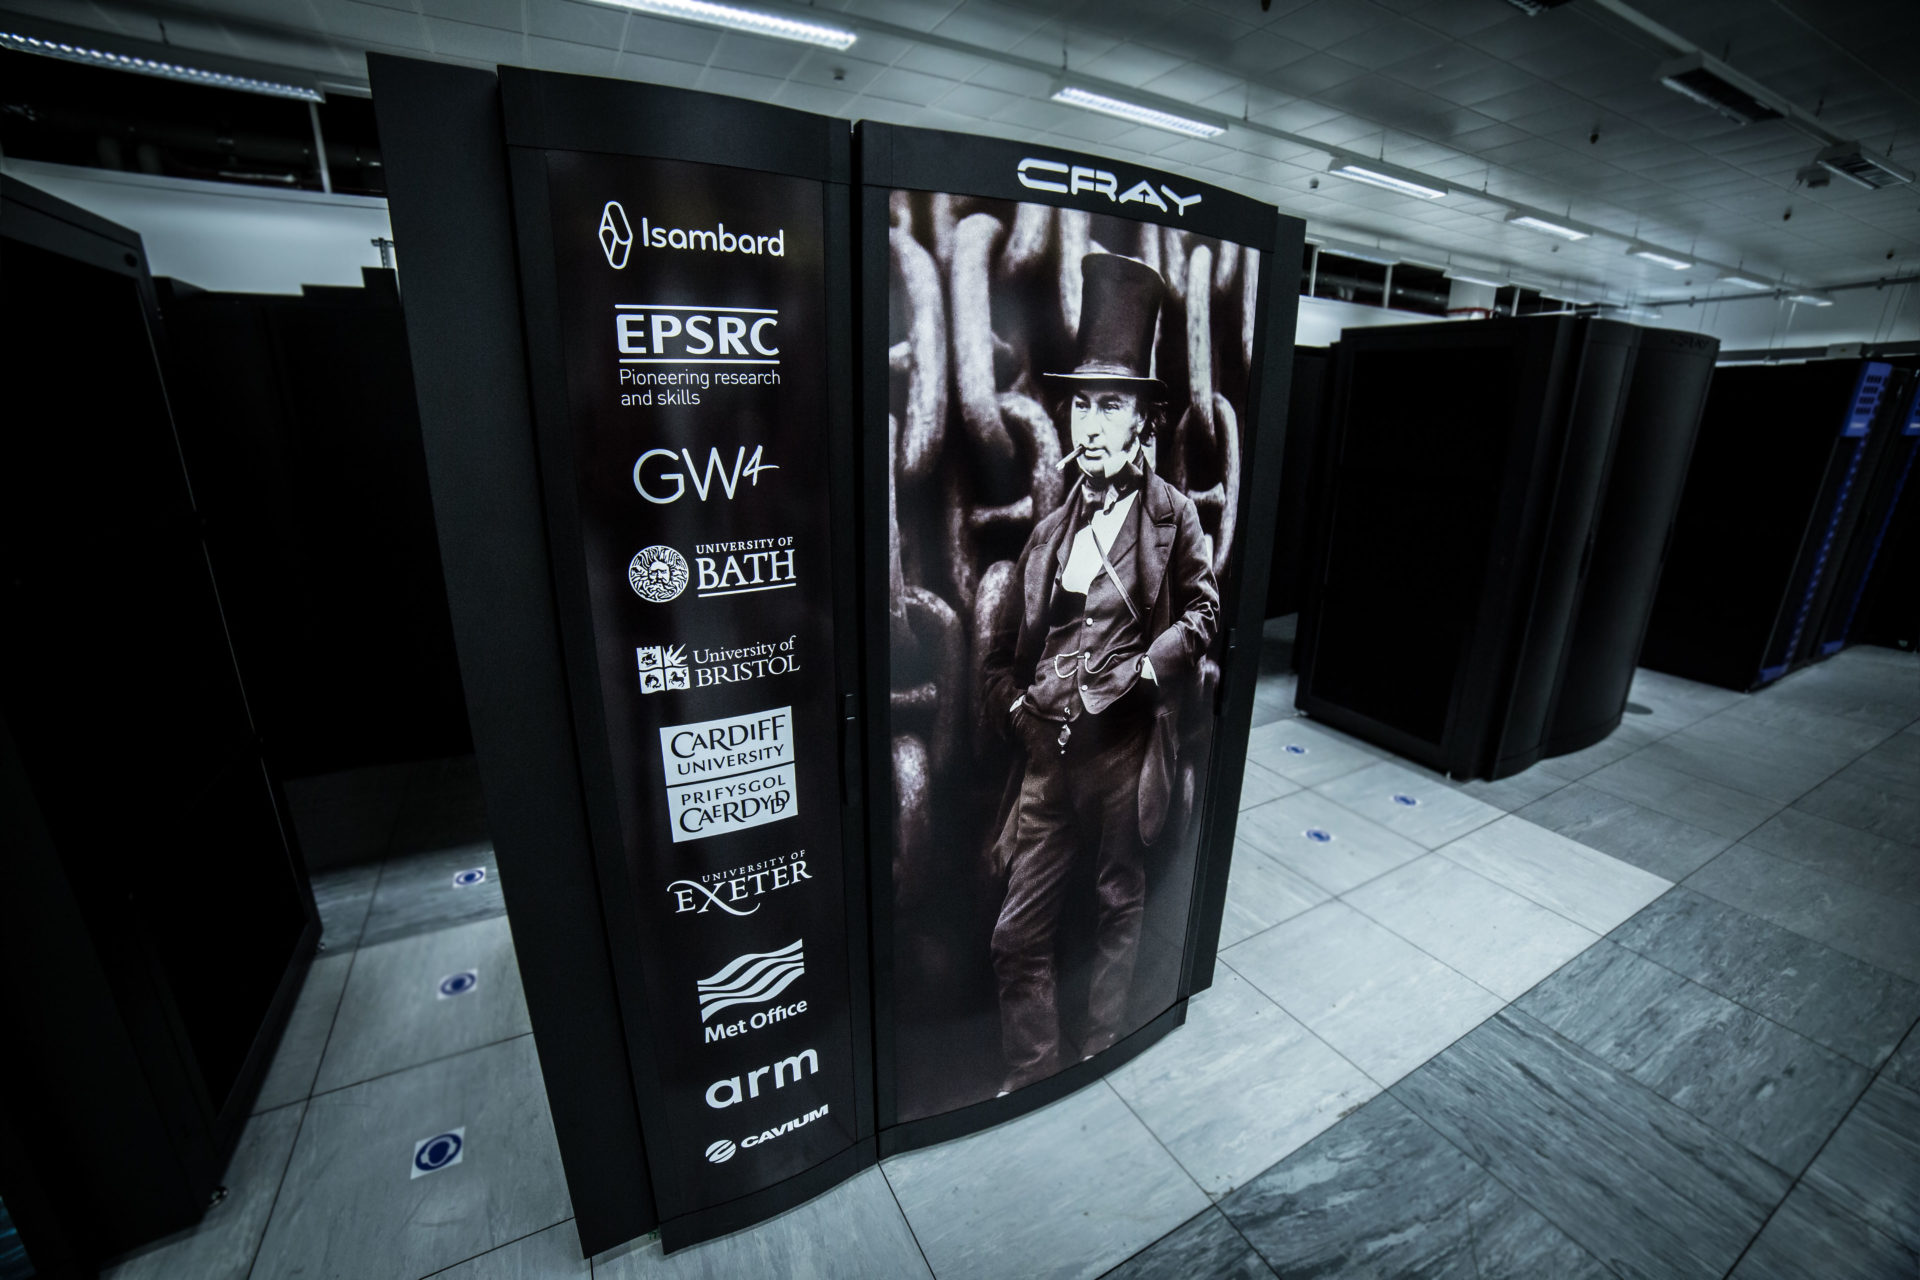 GW4, THE MET OFFICE, AND CRAY POWER UP THE LARGEST ARM-BASED SUPERCOMPUTER IN EUROPE